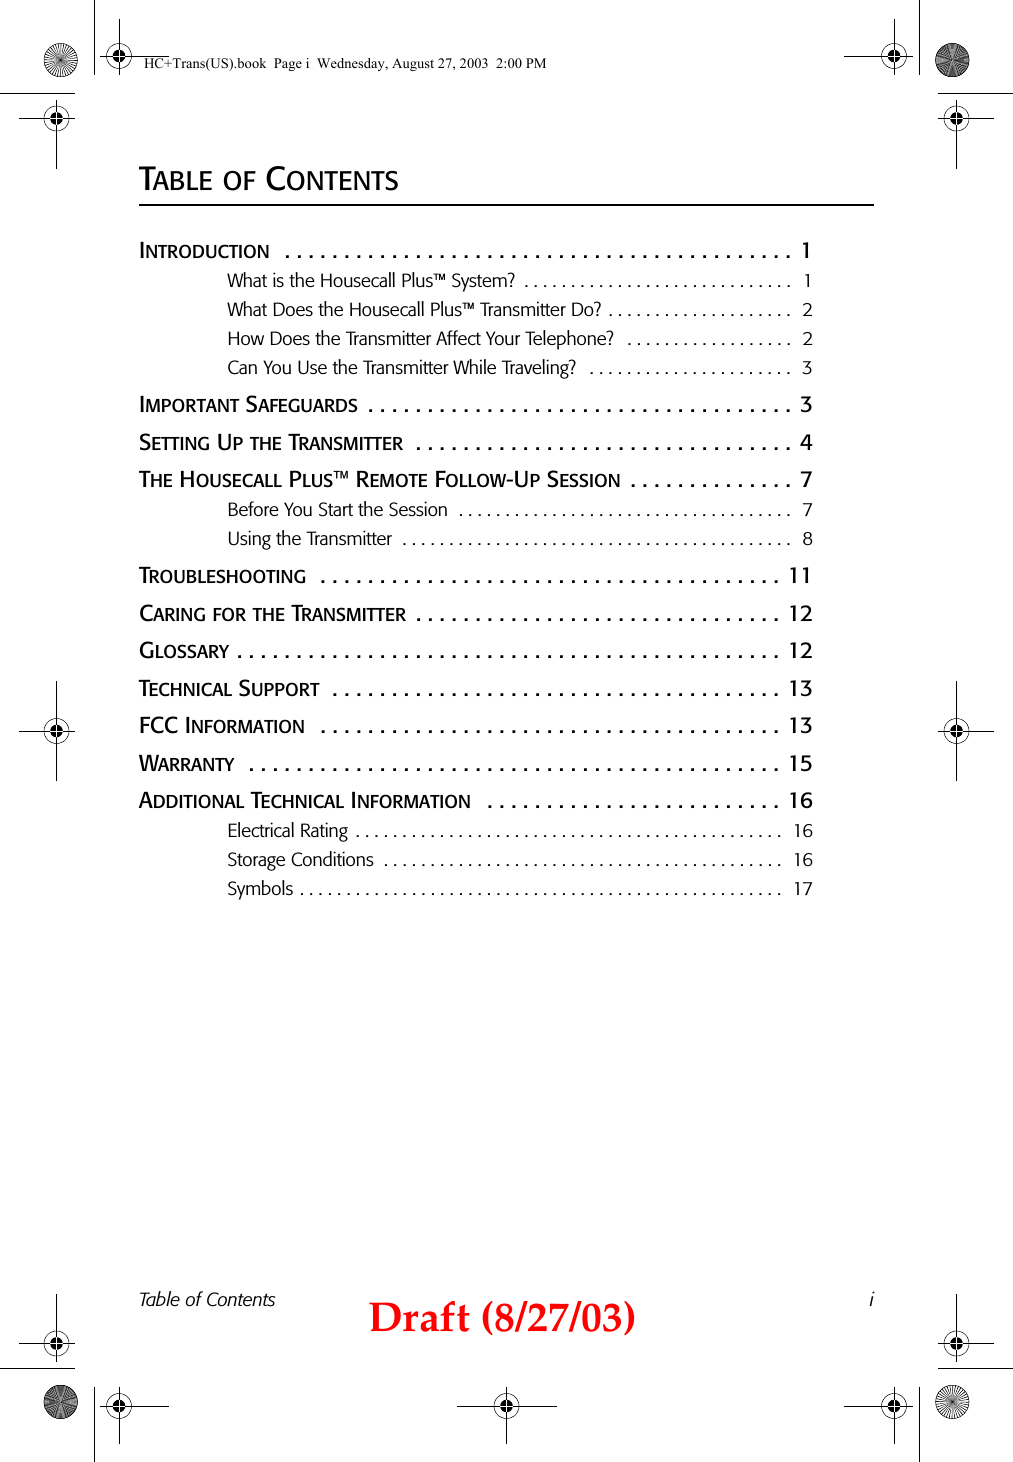 Table of Contents iTABLE OF CONTENTSINTRODUCTION  . . . . . . . . . . . . . . . . . . . . . . . . . . . . . . . . . . . . . . . . . . . 1What is the Housecall Plus™ System?  . . . . . . . . . . . . . . . . . . . . . . . . . . . . .  1What Does the Housecall Plus™ Transmitter Do? . . . . . . . . . . . . . . . . . . . .  2How Does the Transmitter Affect Your Telephone?   . . . . . . . . . . . . . . . . . .  2Can You Use the Transmitter While Traveling?   . . . . . . . . . . . . . . . . . . . . . .  3IMPORTANT SAFEGUARDS  . . . . . . . . . . . . . . . . . . . . . . . . . . . . . . . . . . . . 3SETTING UP THE TRANSMITTER  . . . . . . . . . . . . . . . . . . . . . . . . . . . . . . . . 4THE HOUSECALL PLUS™ REMOTE FOLLOW-UP SESSION . . . . . . . . . . . . . . 7Before You Start the Session  . . . . . . . . . . . . . . . . . . . . . . . . . . . . . . . . . . . .  7Using the Transmitter  . . . . . . . . . . . . . . . . . . . . . . . . . . . . . . . . . . . . . . . . . .  8TROUBLESHOOTING  . . . . . . . . . . . . . . . . . . . . . . . . . . . . . . . . . . . . . . . 11CARING FOR THE TRANSMITTER . . . . . . . . . . . . . . . . . . . . . . . . . . . . . . . 12GLOSSARY . . . . . . . . . . . . . . . . . . . . . . . . . . . . . . . . . . . . . . . . . . . . . . 12TECHNICAL SUPPORT  . . . . . . . . . . . . . . . . . . . . . . . . . . . . . . . . . . . . . . 13FCC INFORMATION  . . . . . . . . . . . . . . . . . . . . . . . . . . . . . . . . . . . . . . . 13WARRANTY  . . . . . . . . . . . . . . . . . . . . . . . . . . . . . . . . . . . . . . . . . . . . . 15ADDITIONAL TECHNICAL INFORMATION   . . . . . . . . . . . . . . . . . . . . . . . . . 16Electrical Rating  . . . . . . . . . . . . . . . . . . . . . . . . . . . . . . . . . . . . . . . . . . . . . .  16Storage Conditions  . . . . . . . . . . . . . . . . . . . . . . . . . . . . . . . . . . . . . . . . . . .  16Symbols . . . . . . . . . . . . . . . . . . . . . . . . . . . . . . . . . . . . . . . . . . . . . . . . . . . .  17HC+Trans(US).book  Page i  Wednesday, August 27, 2003  2:00 PMDraft (8/27/03)